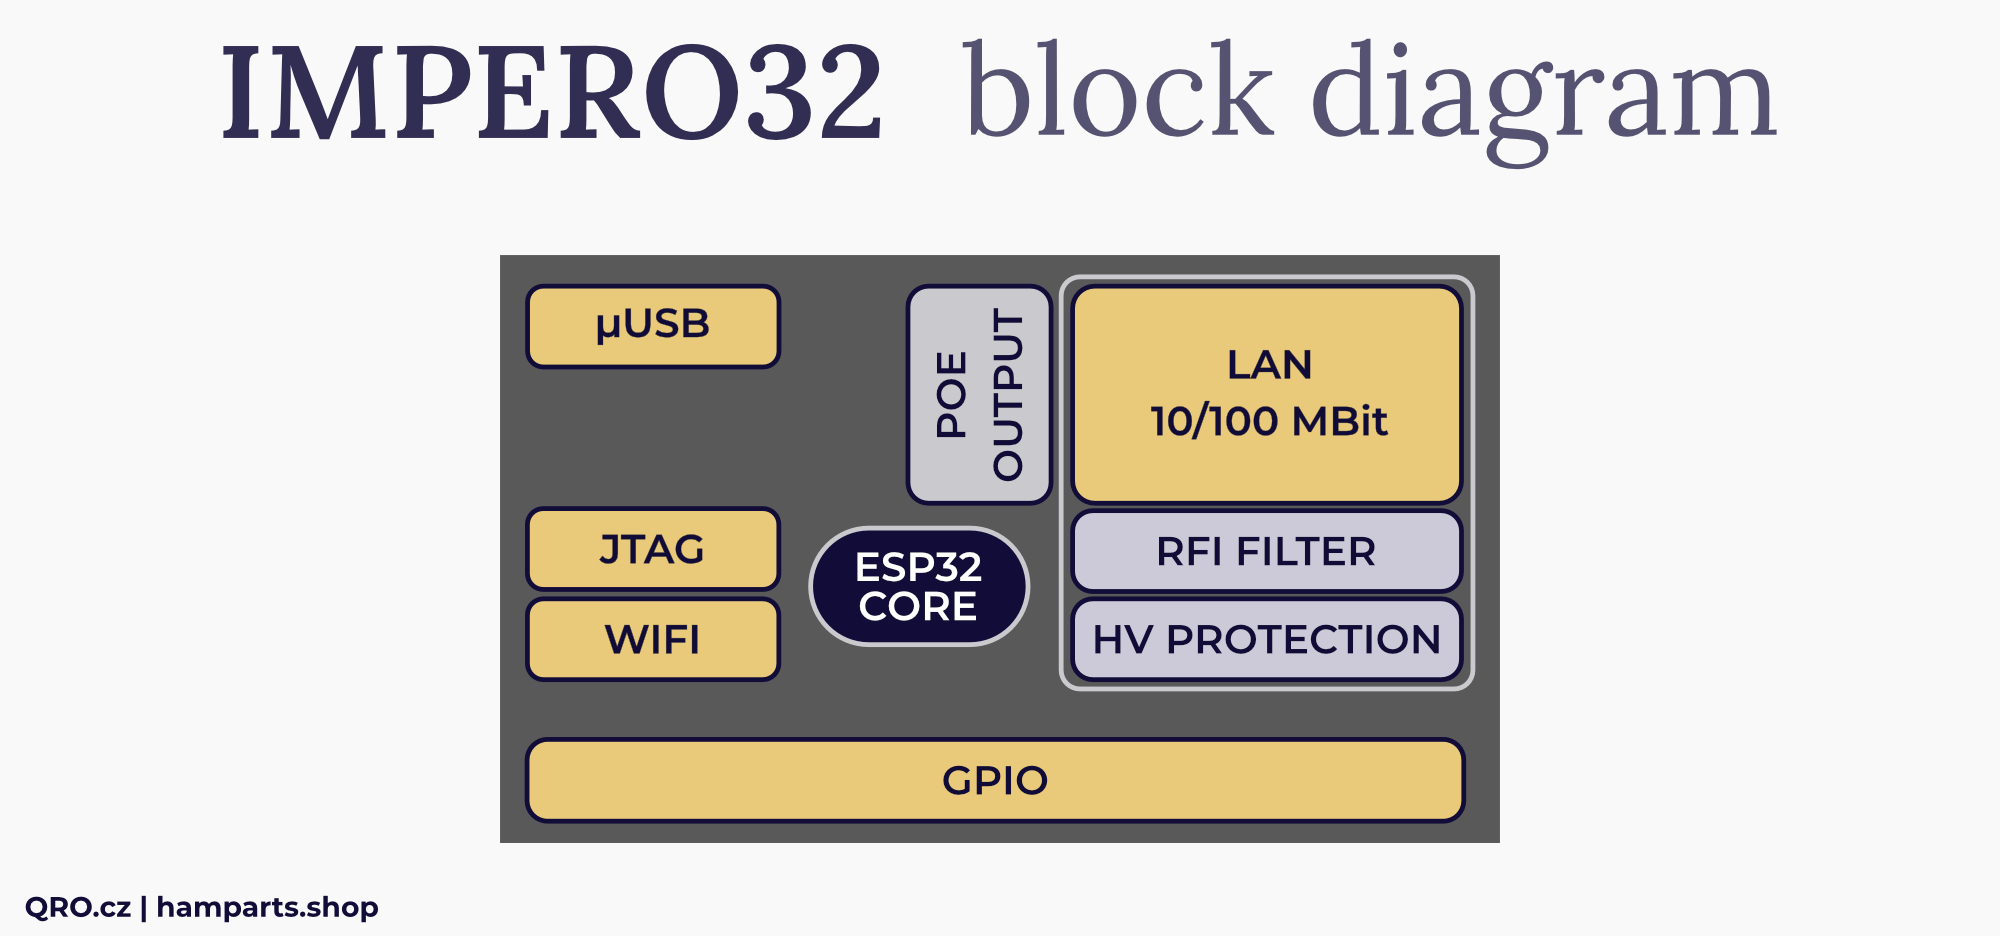 block diagram for LAN core easy controller for stack match 1-2  by qro.cz hamparts.shop